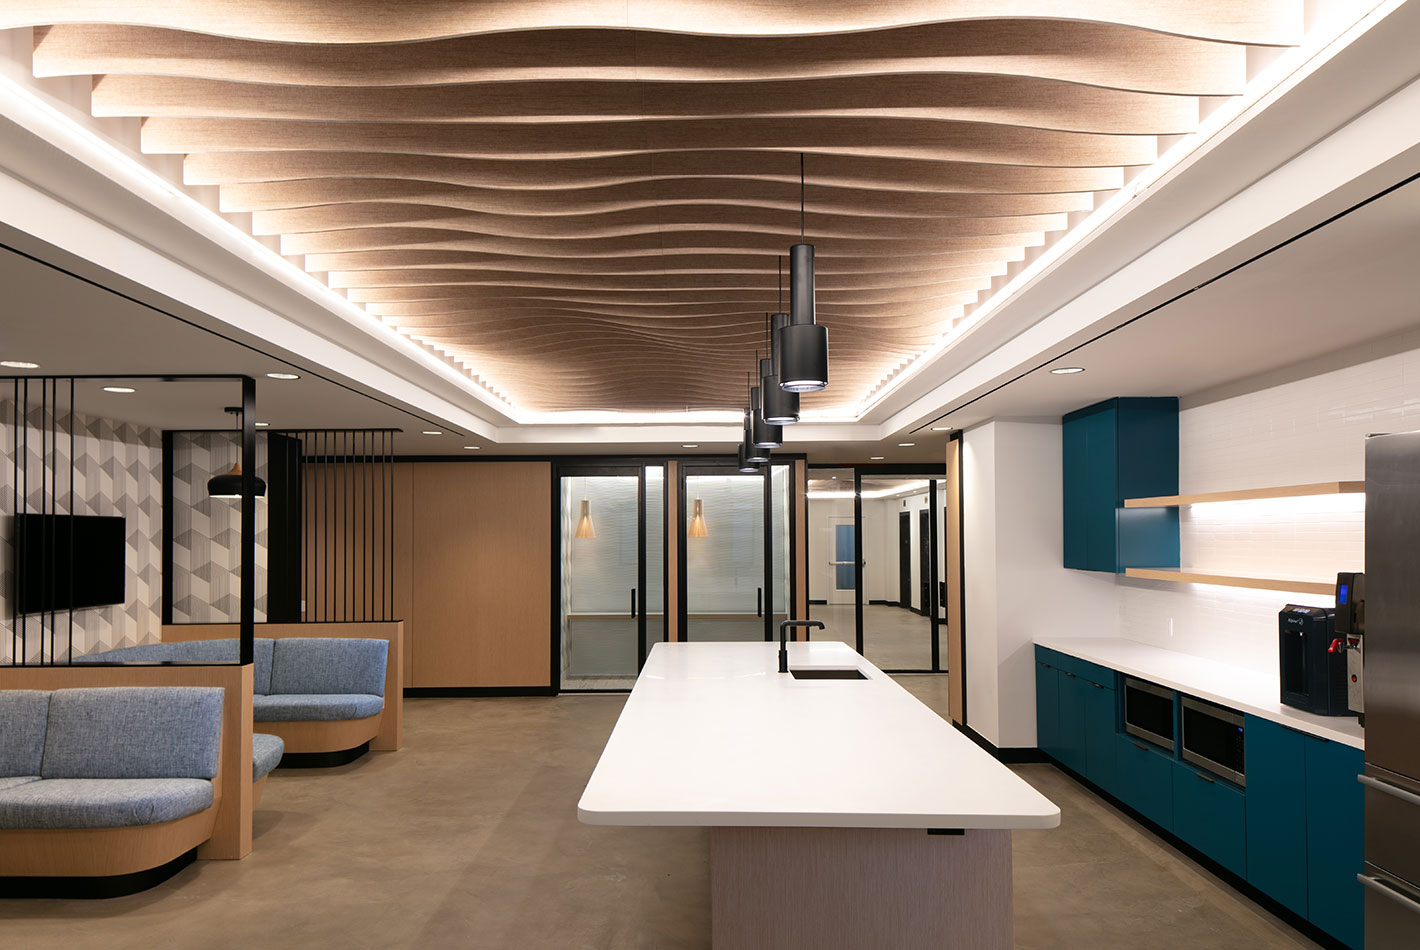 A sculptural wood-slat ceiling rises above 2 gray flannel banquettes, complete with video screens, in the entry of Work Better Coworking Offices in Tribeca